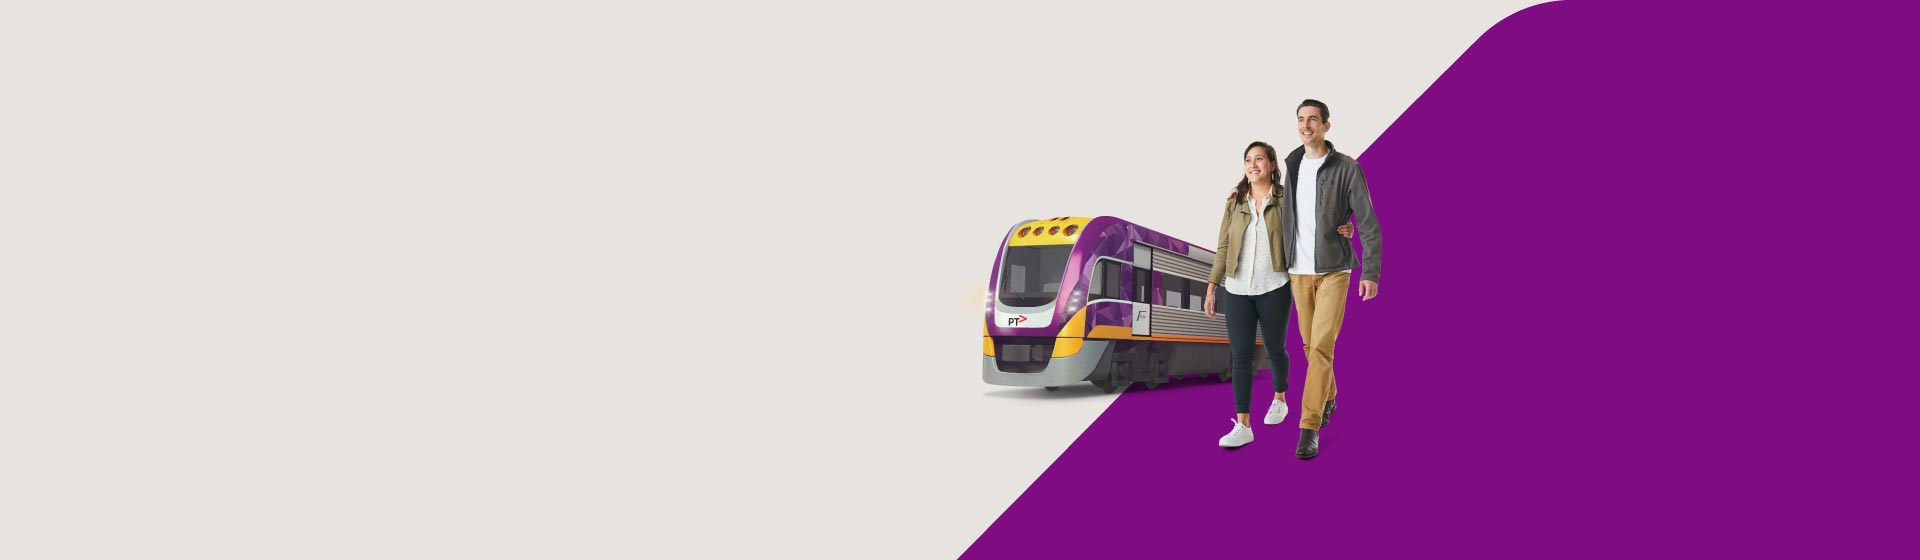 Image: A man and a woman walk together, with the woman holding the man around the waist. A V/Line train is behind them, on a half-grey, half-purple background.